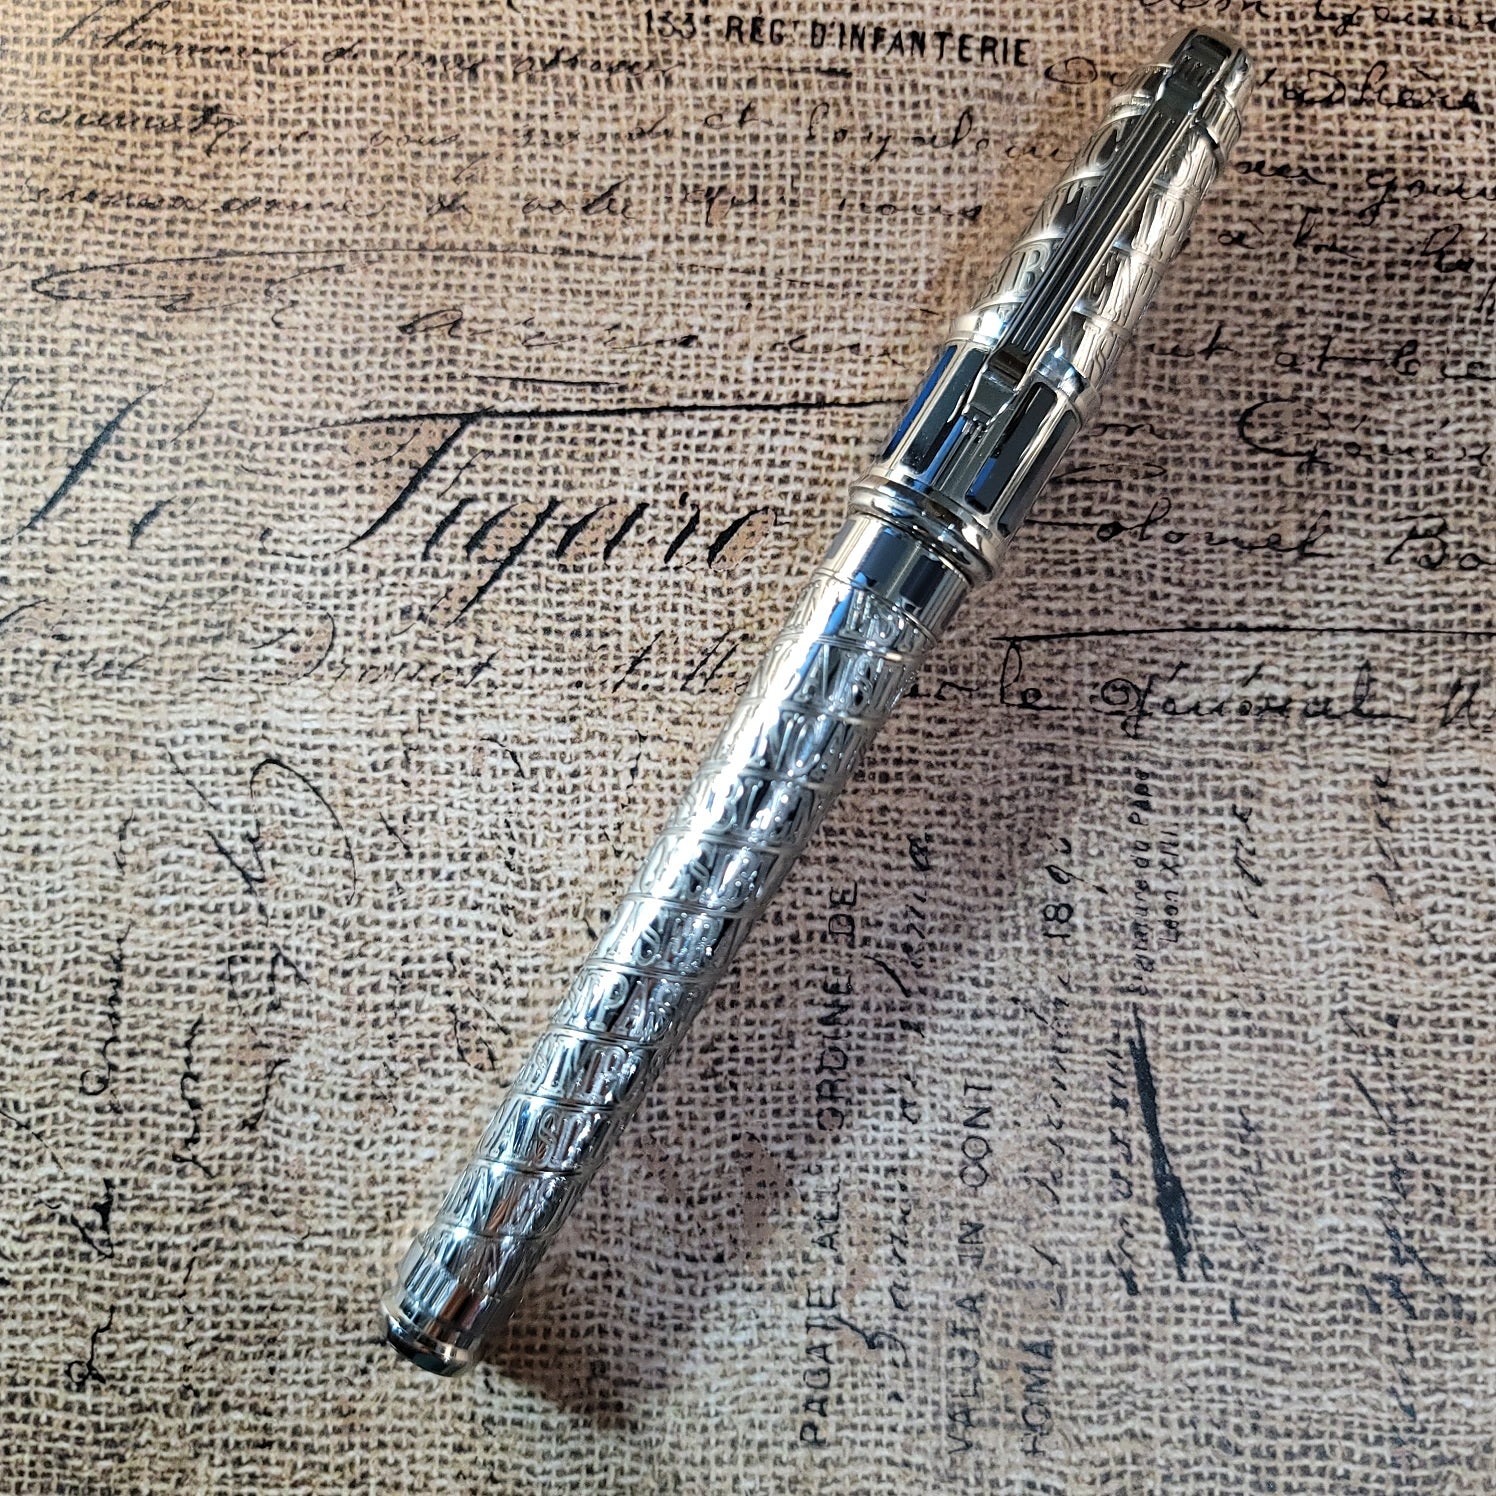 Limited Edition Olympio XL S.T. Dupont Place Vendome Roller Ball Pen - New in Box with Papers  | Peters Vaults